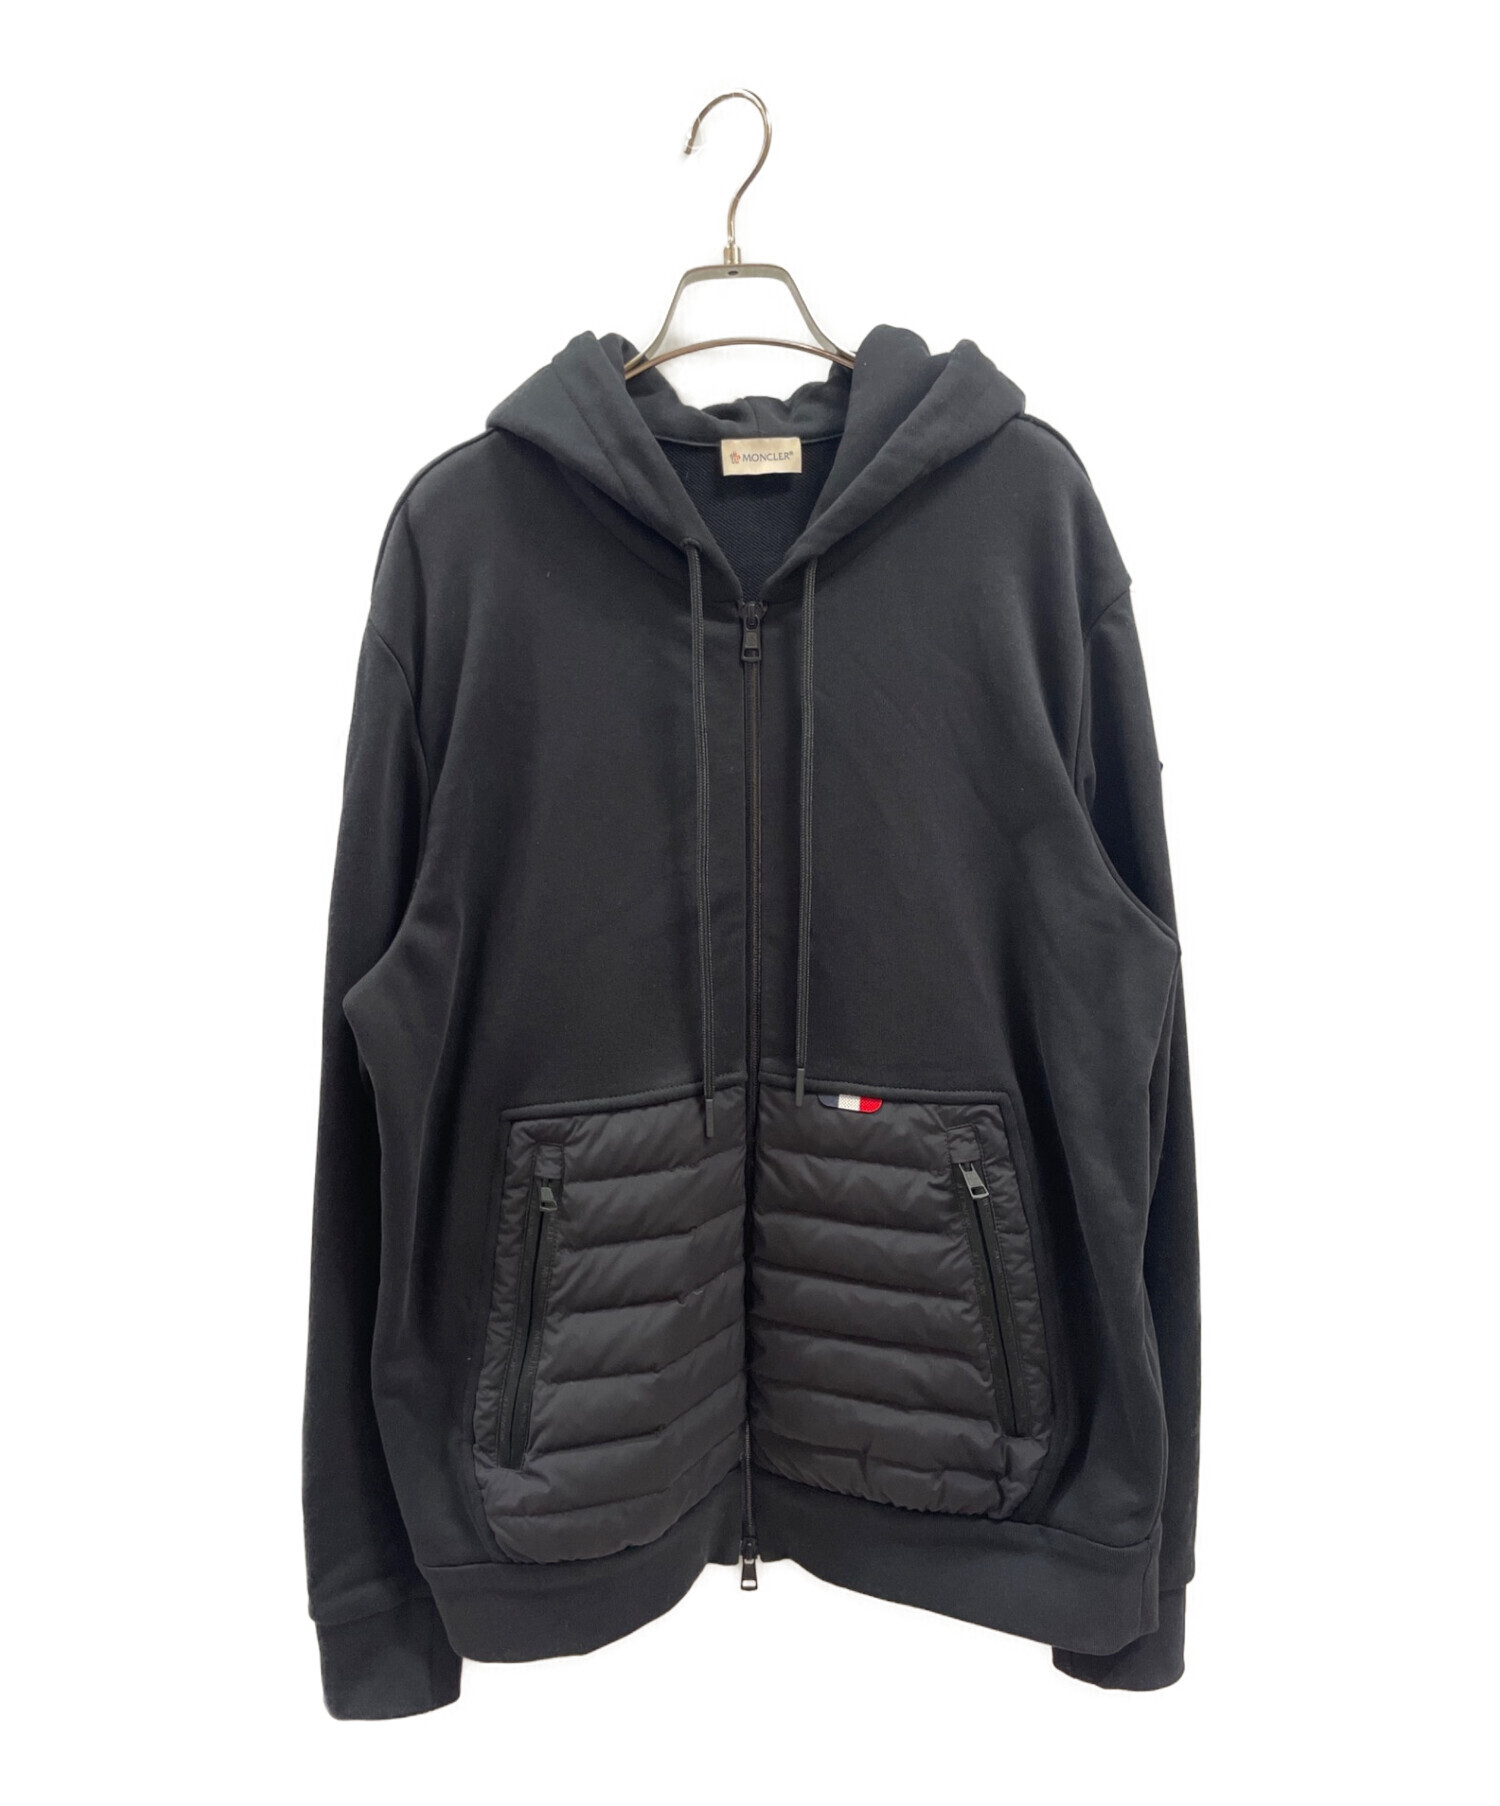 MONCLER　モンクレール　パーカー　ナイロン　切り替え